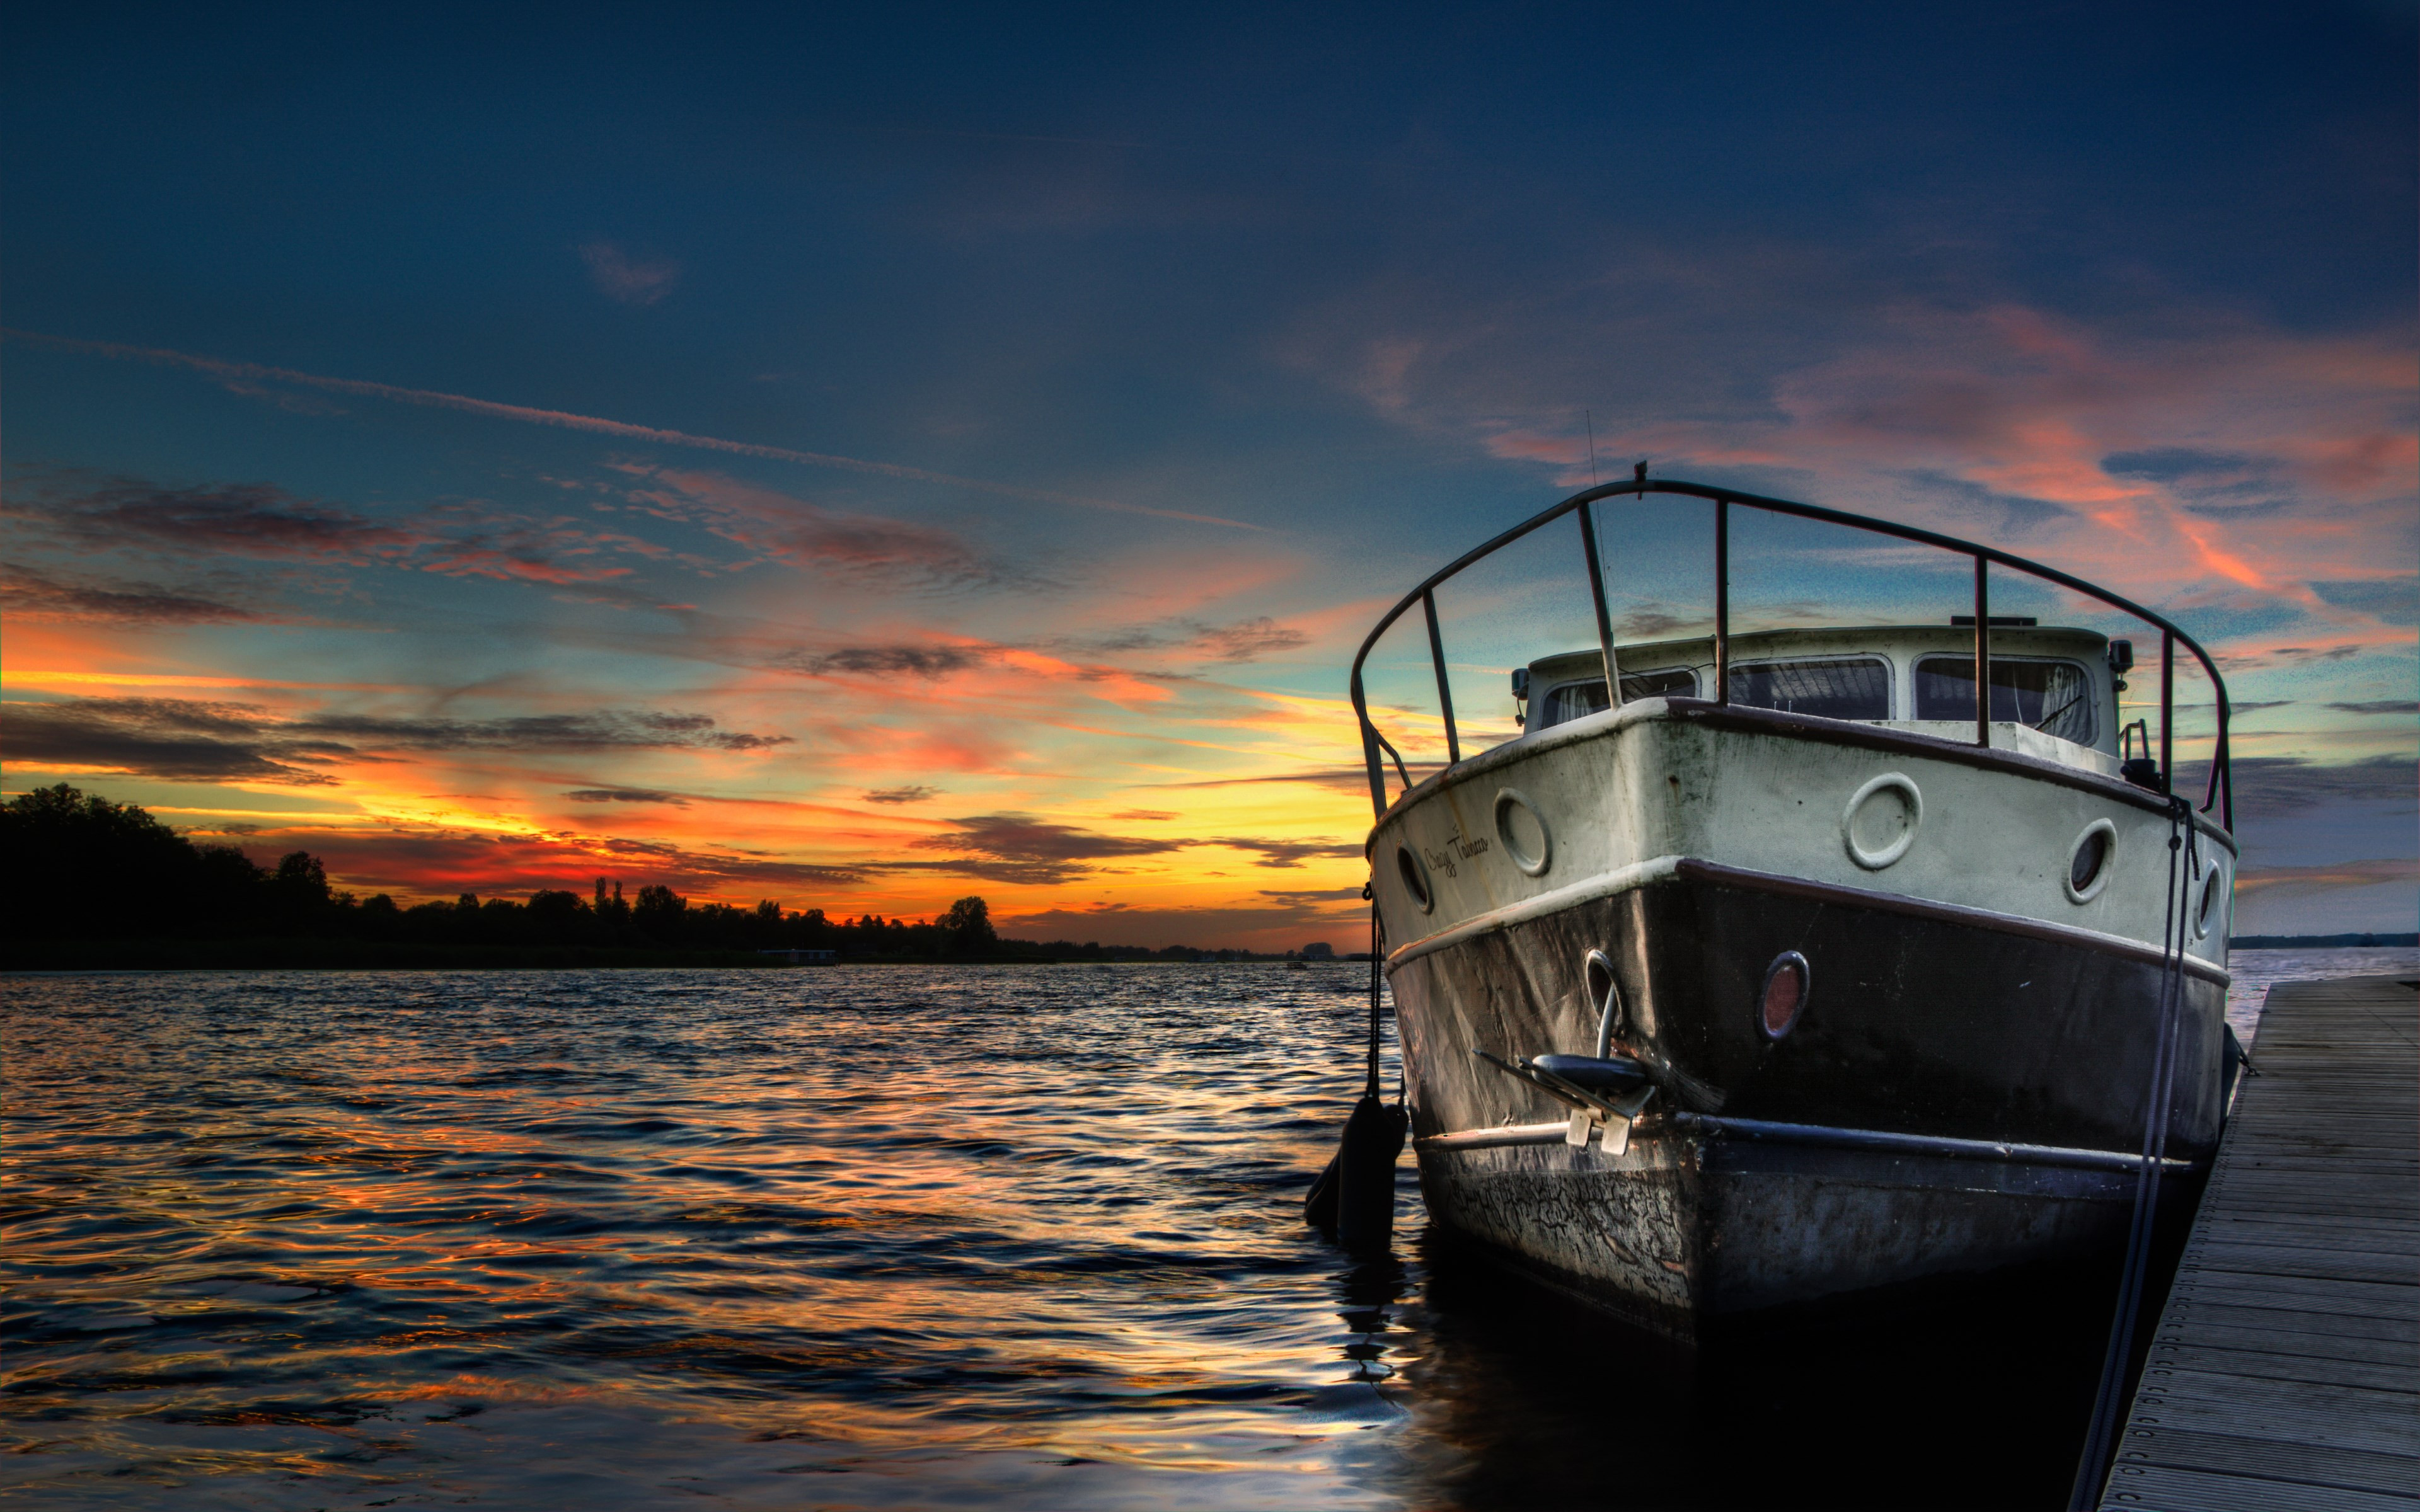 Boat and sunset in background wallpaper 3840x2400